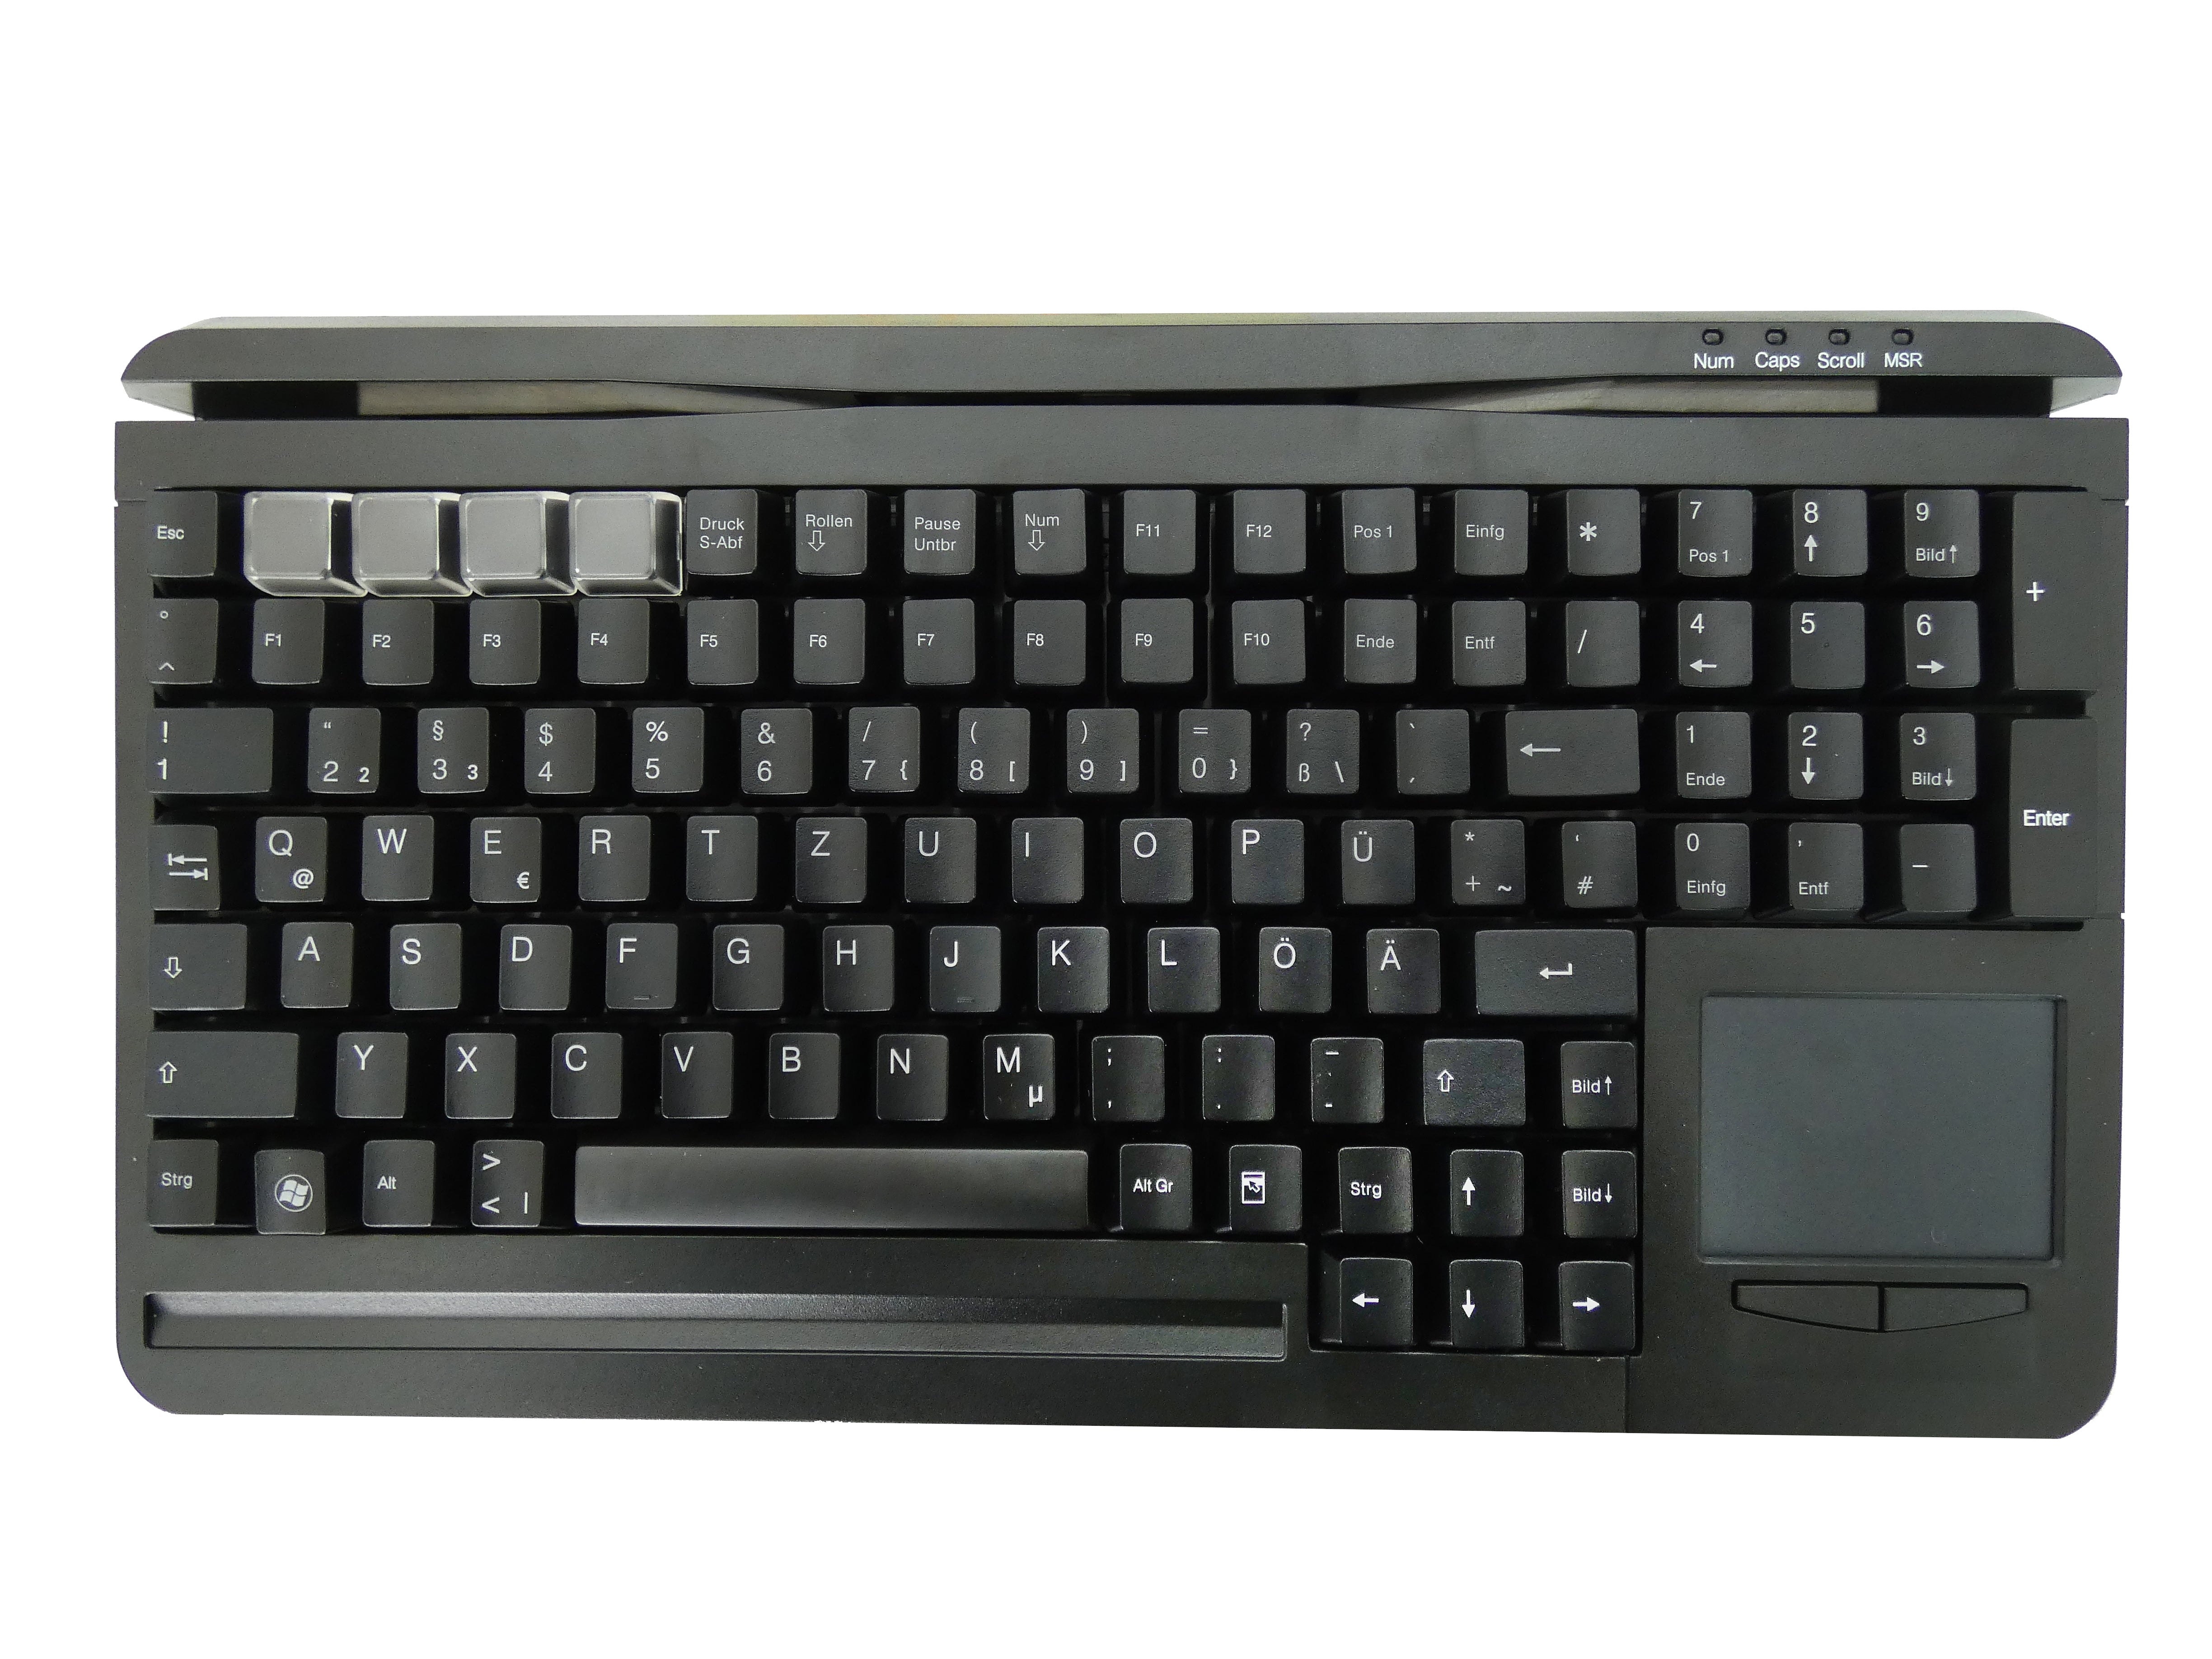 Accuratus S109C - USB Compact QWERTY & Programmable POS 109 Key Keyboard with MSR and Touchpad